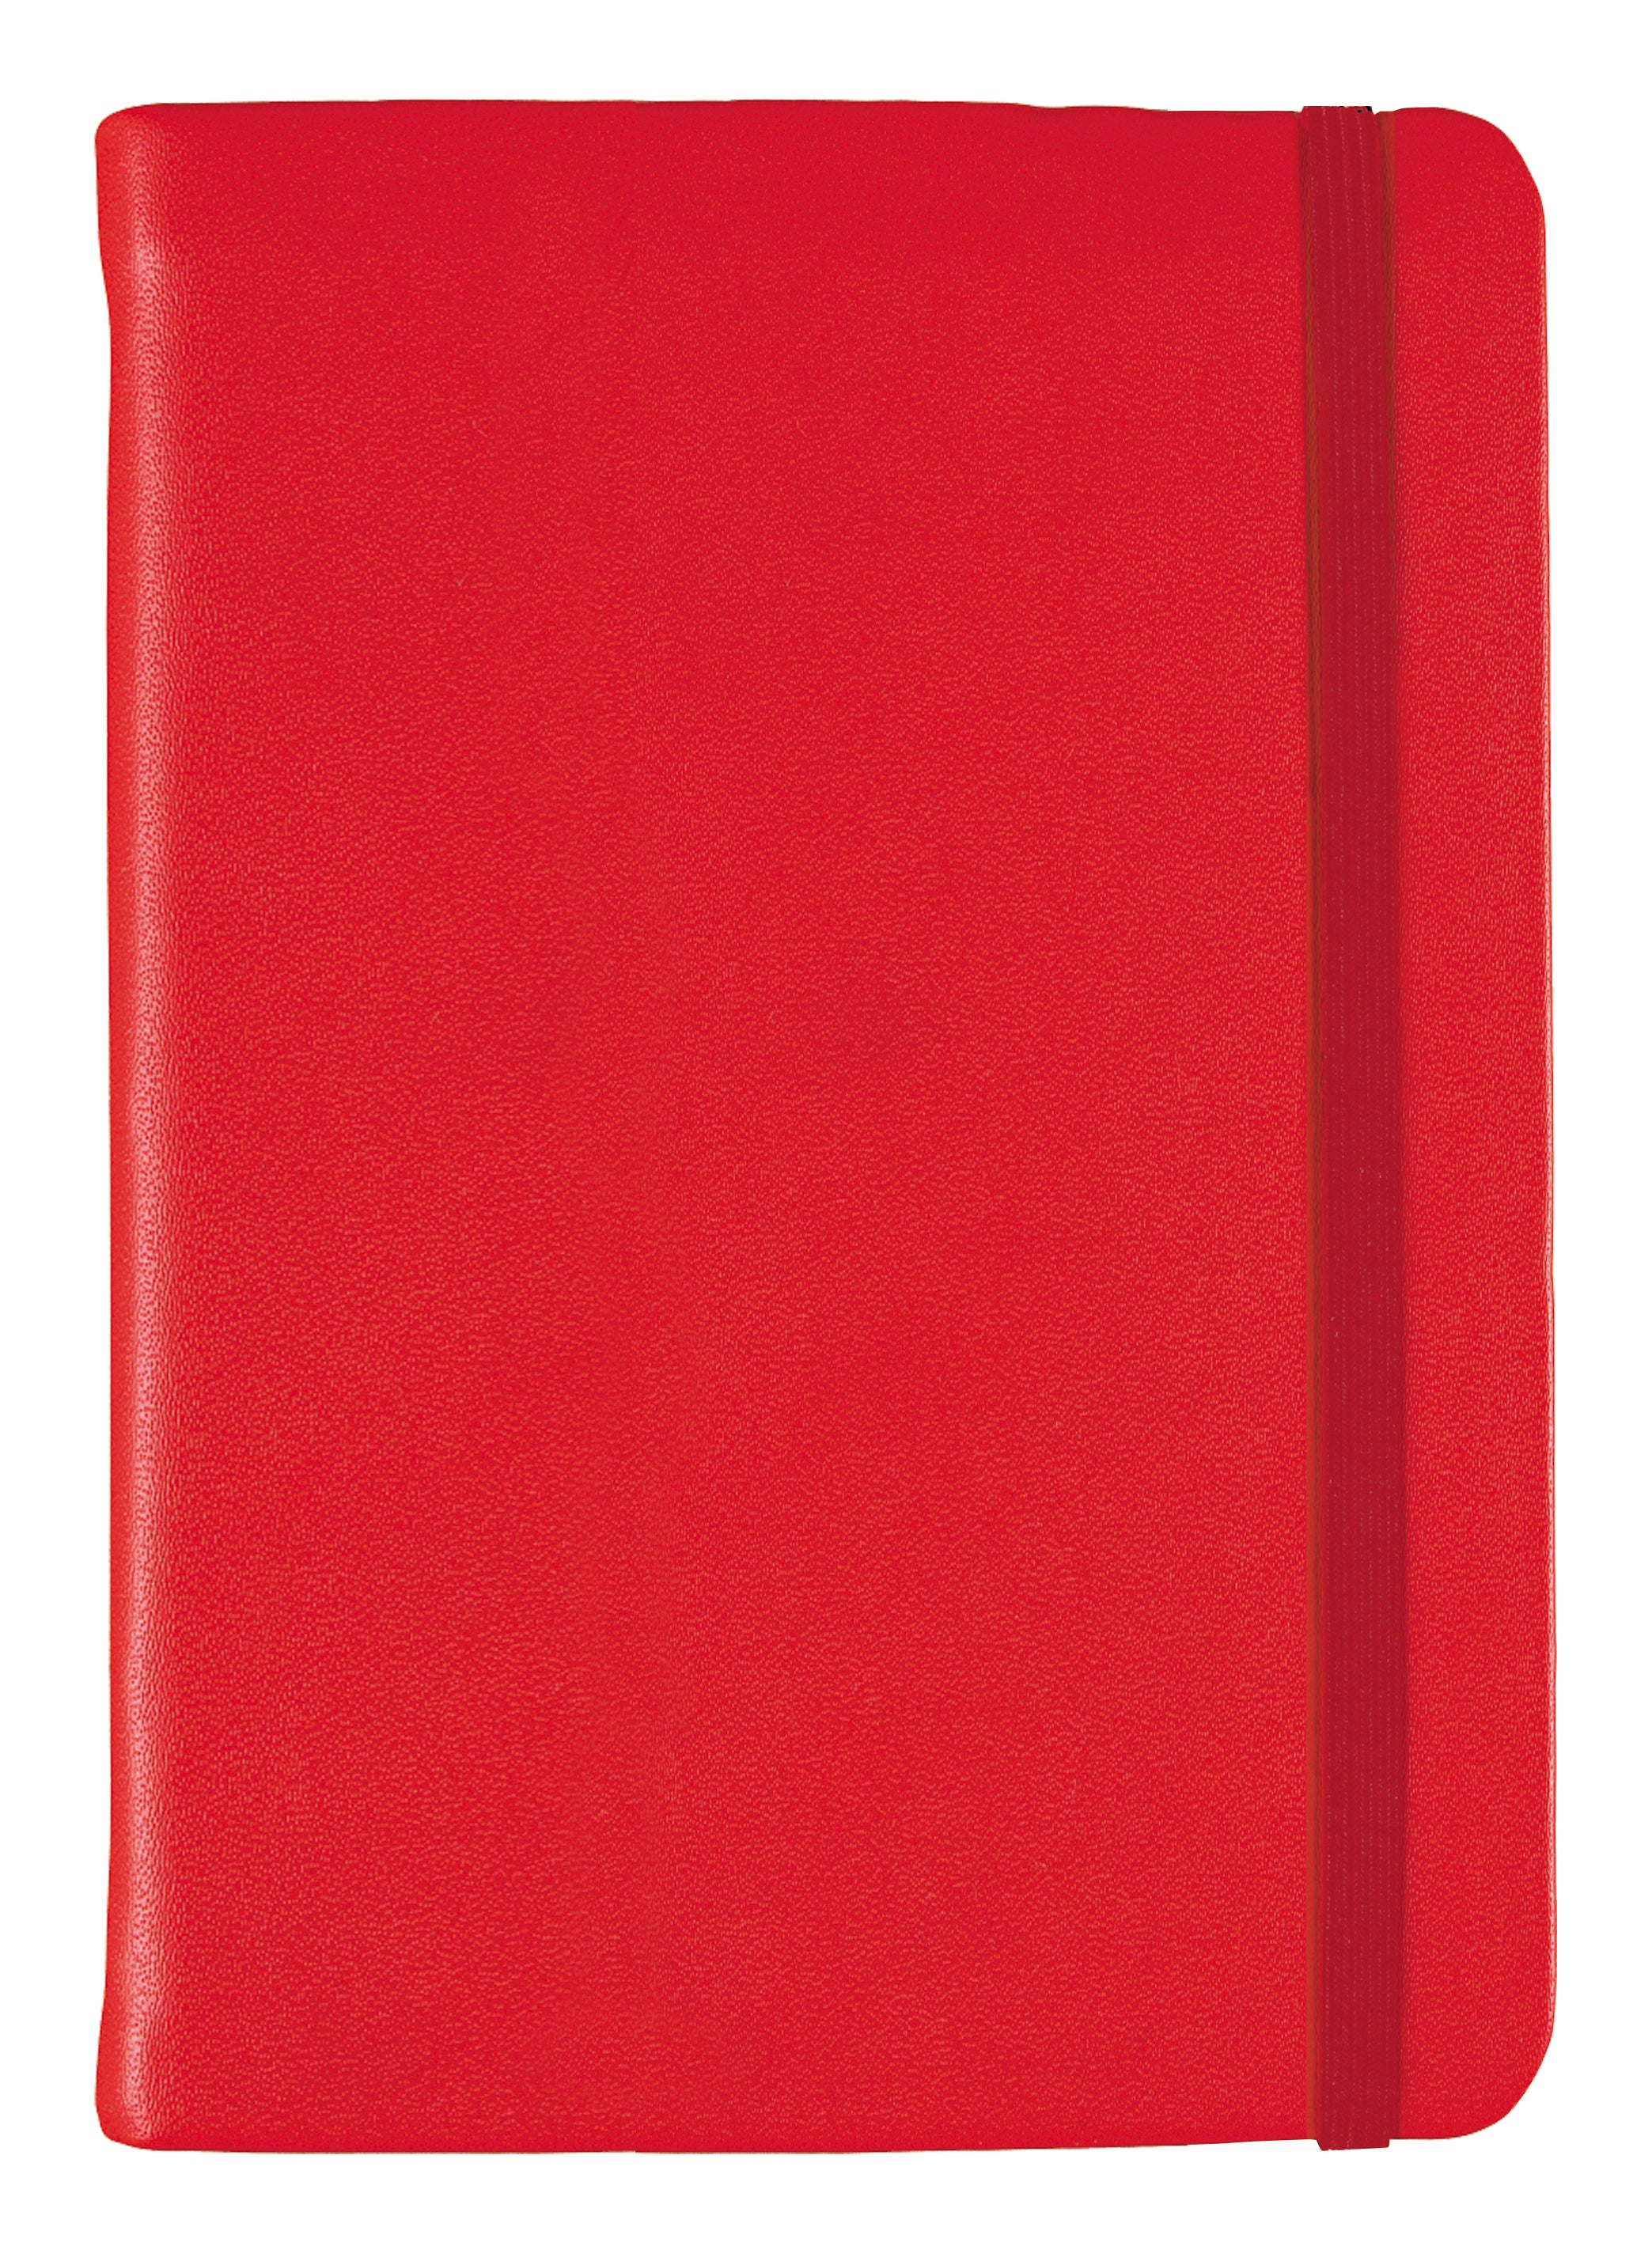 Collins Vauxhall-Notebooks-A5 Red